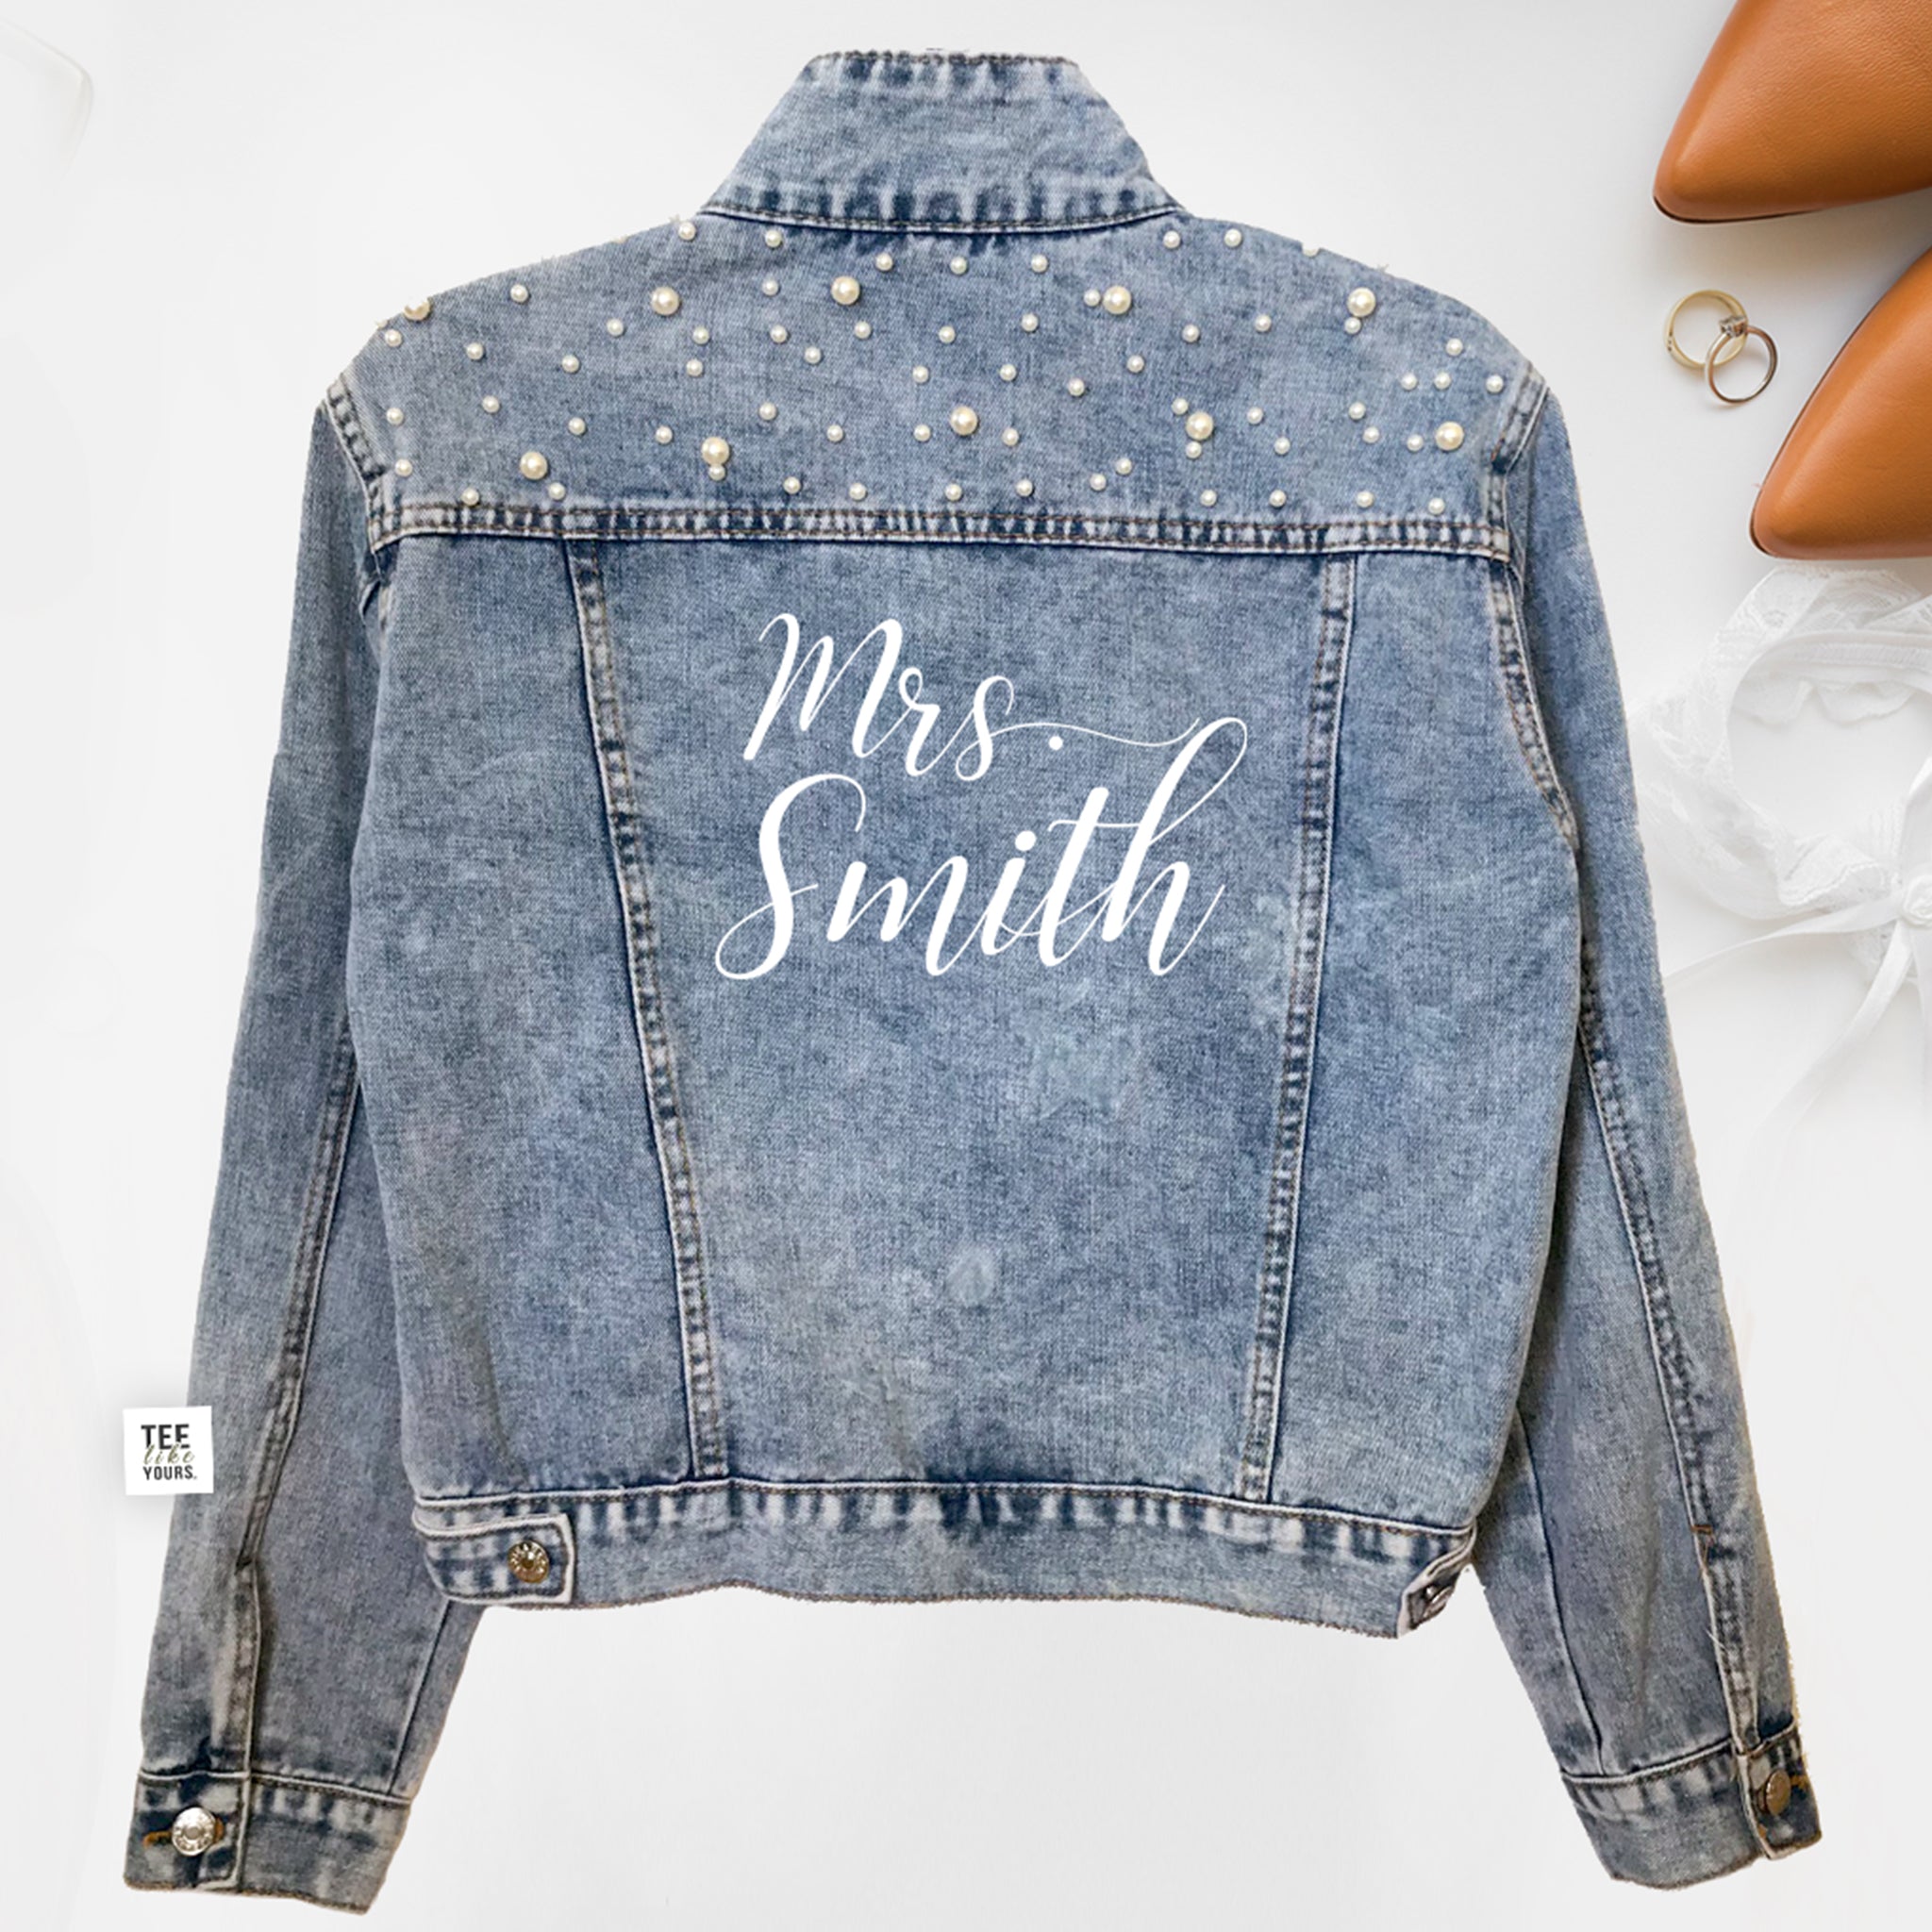 Embroidered Bride Jean Jacket with Flowers